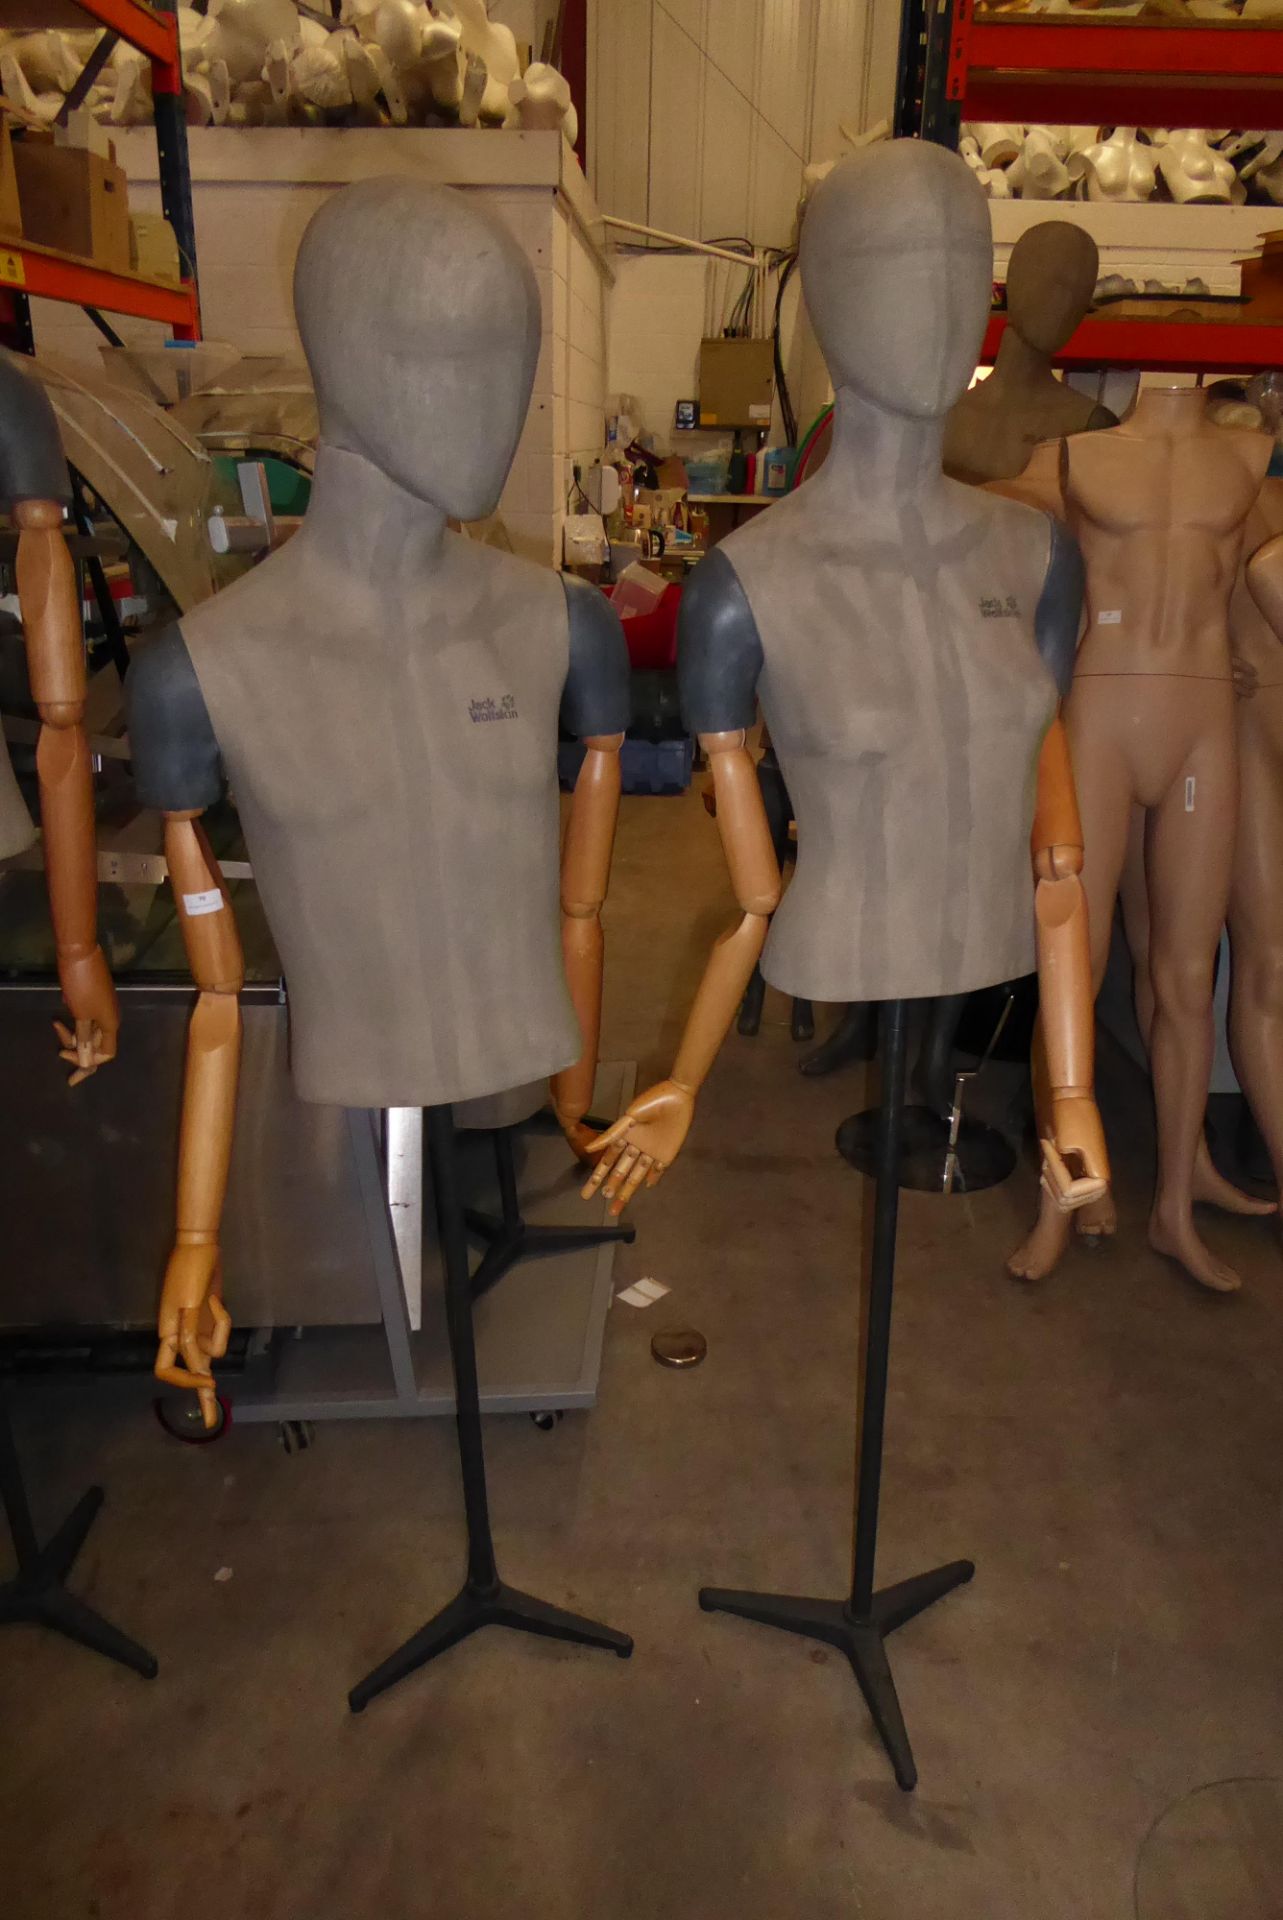 * 2x high quality male and female upper half mannequin with articulated arms on stands.